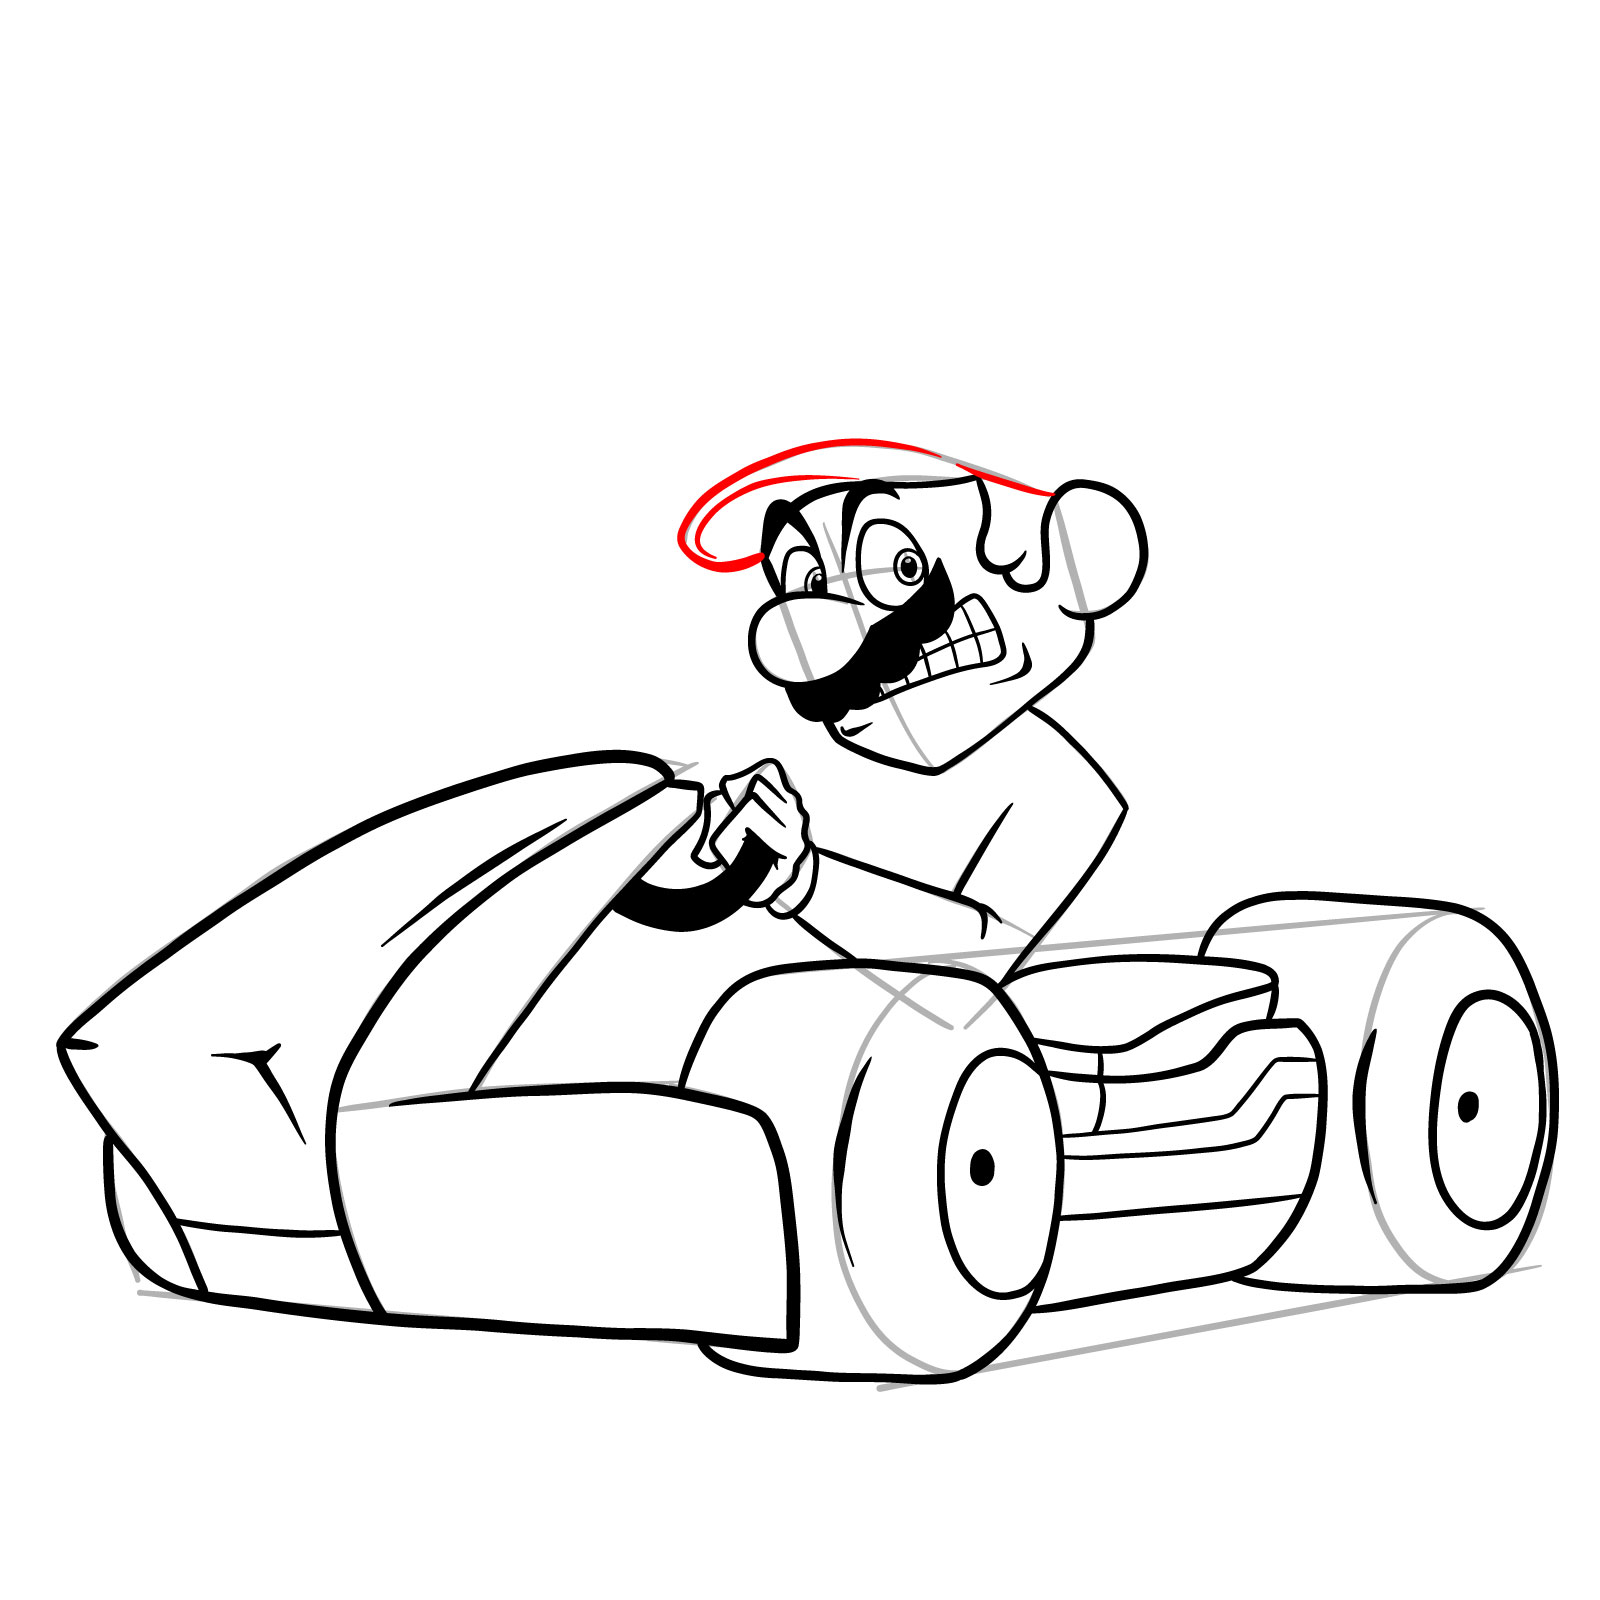 How to draw Race Traitors Mario - step 29